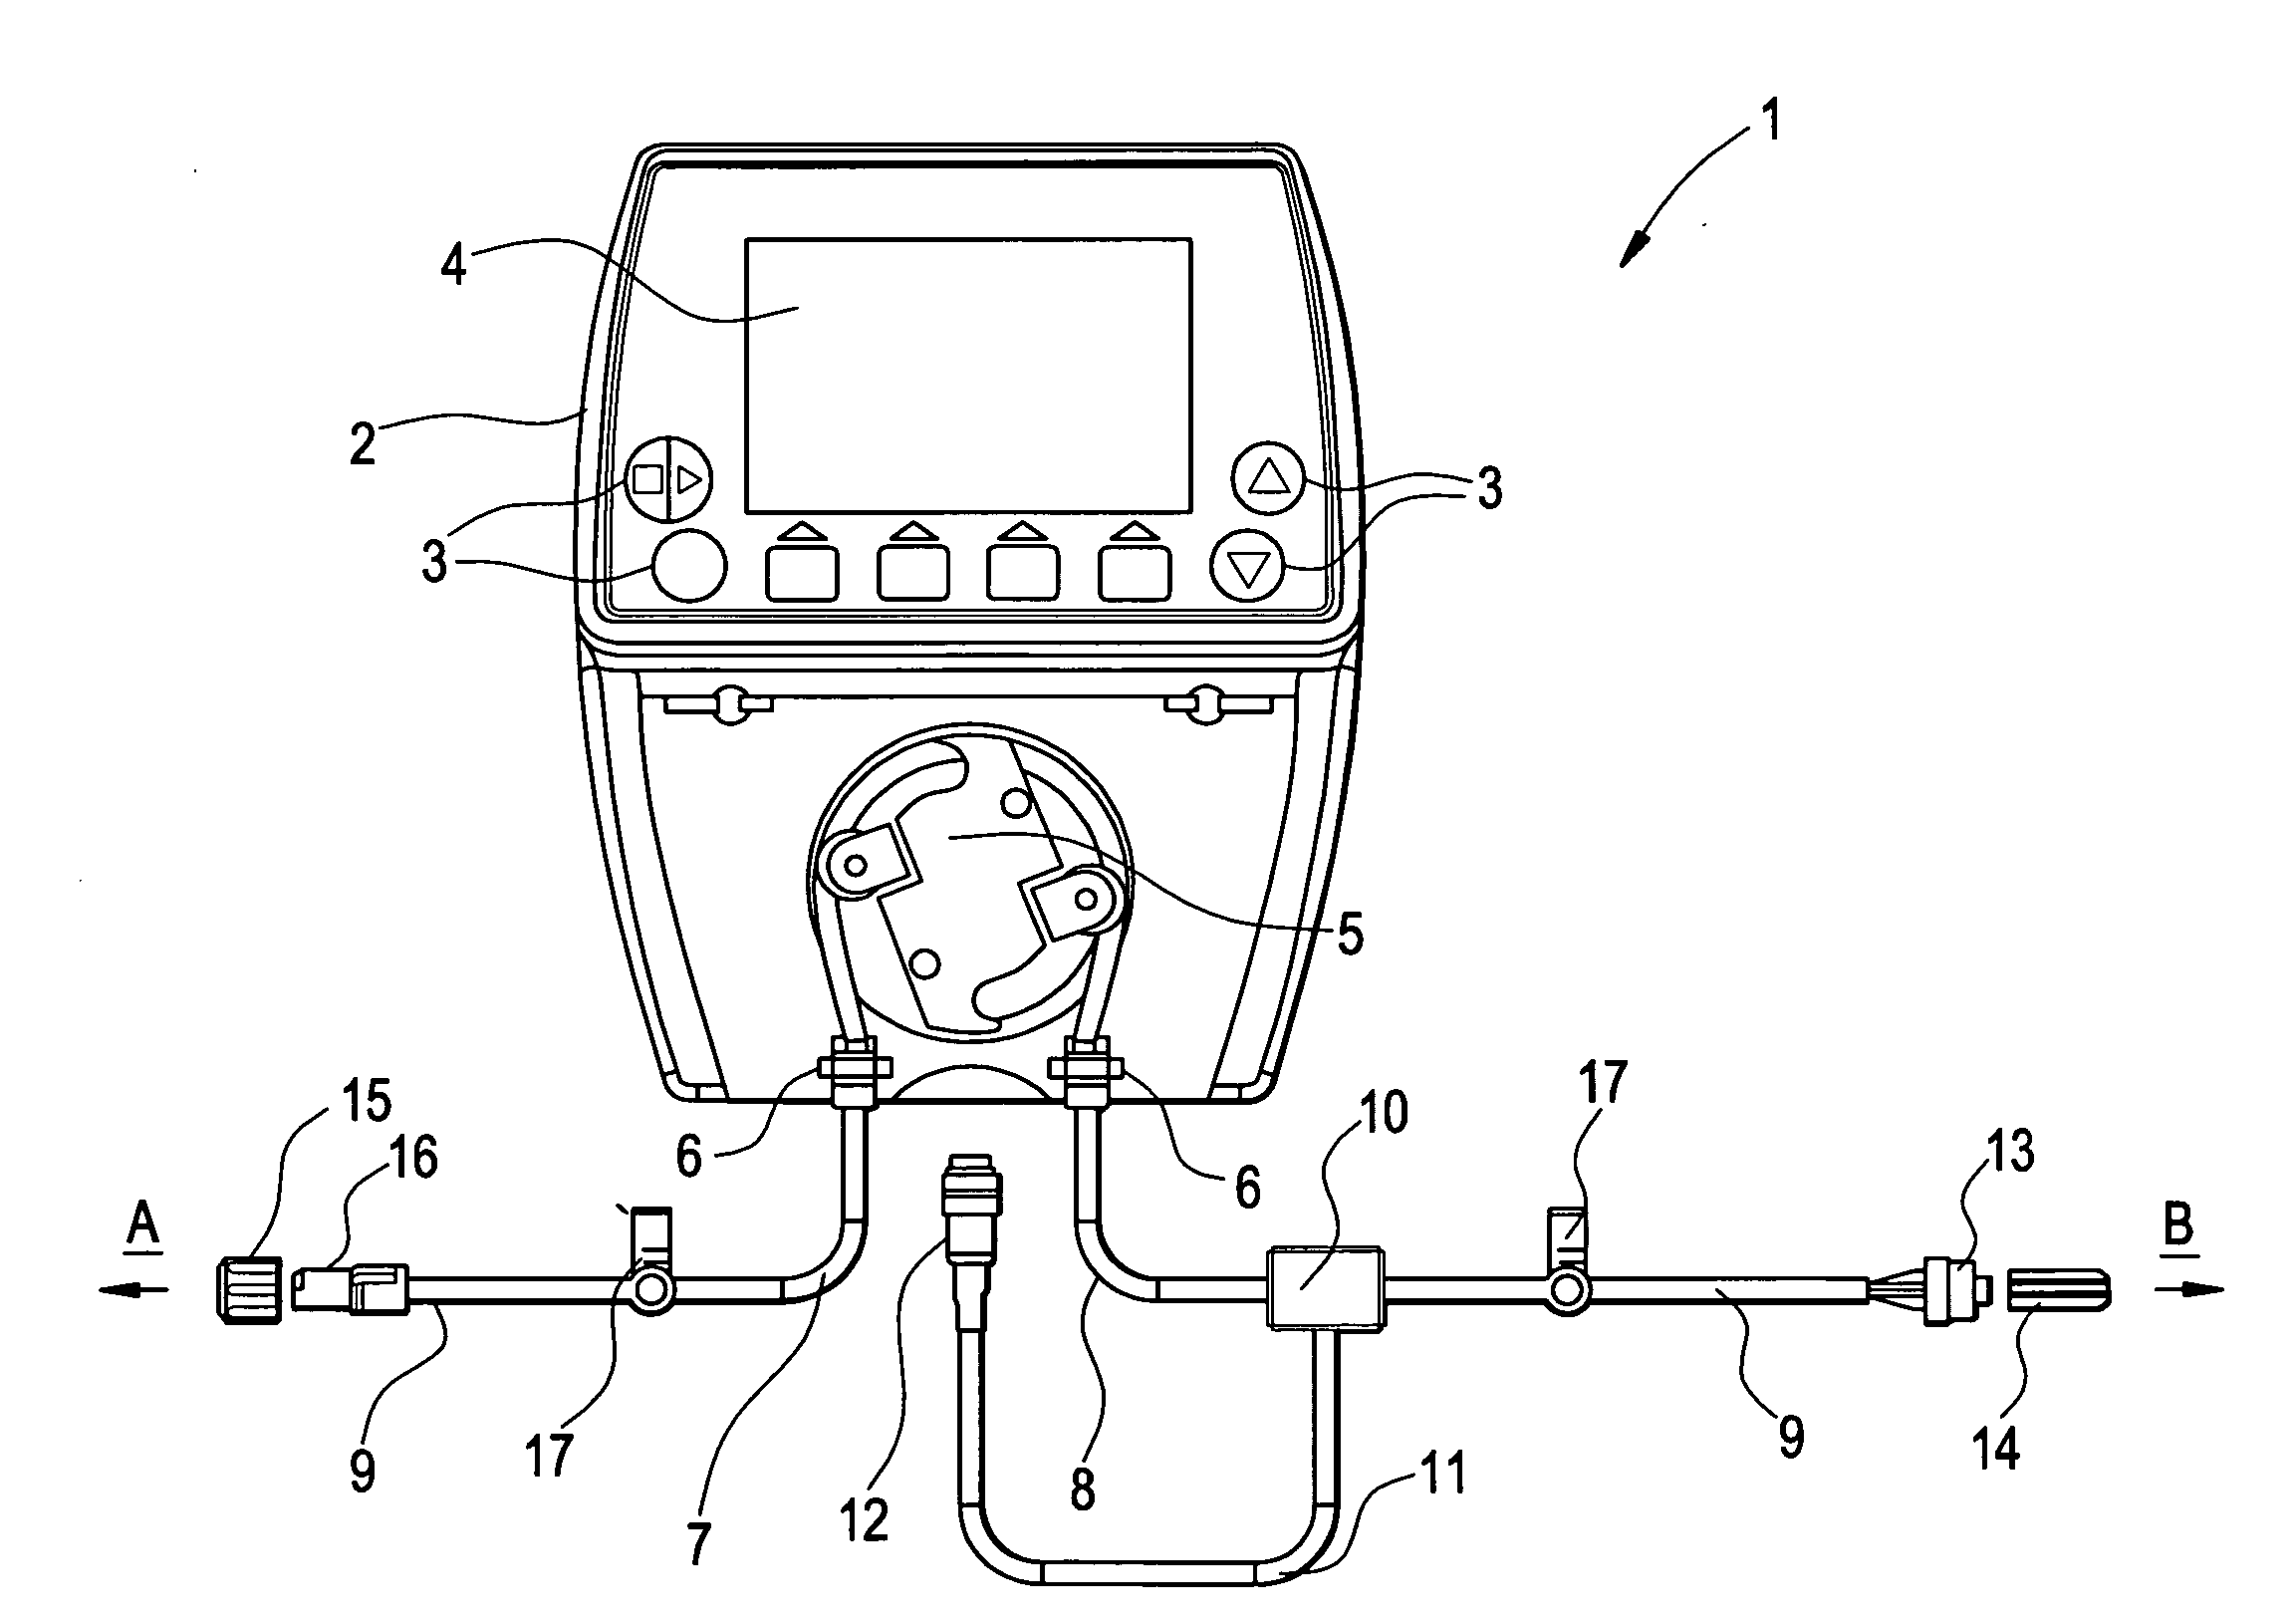 Drainage system for cerebrospinal fluid